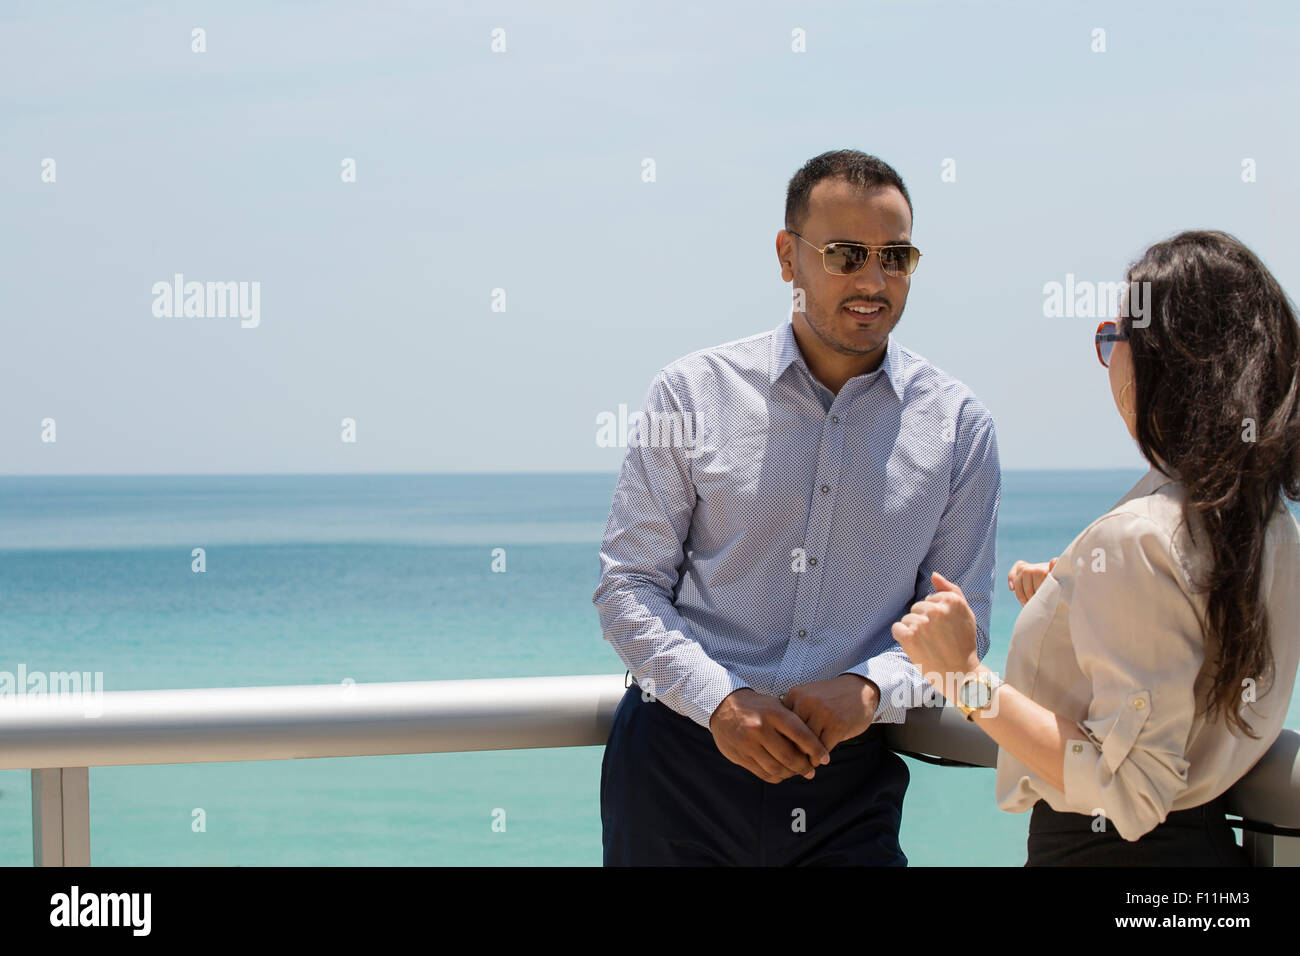 Business people talking on balcony over ocean Stock Photo